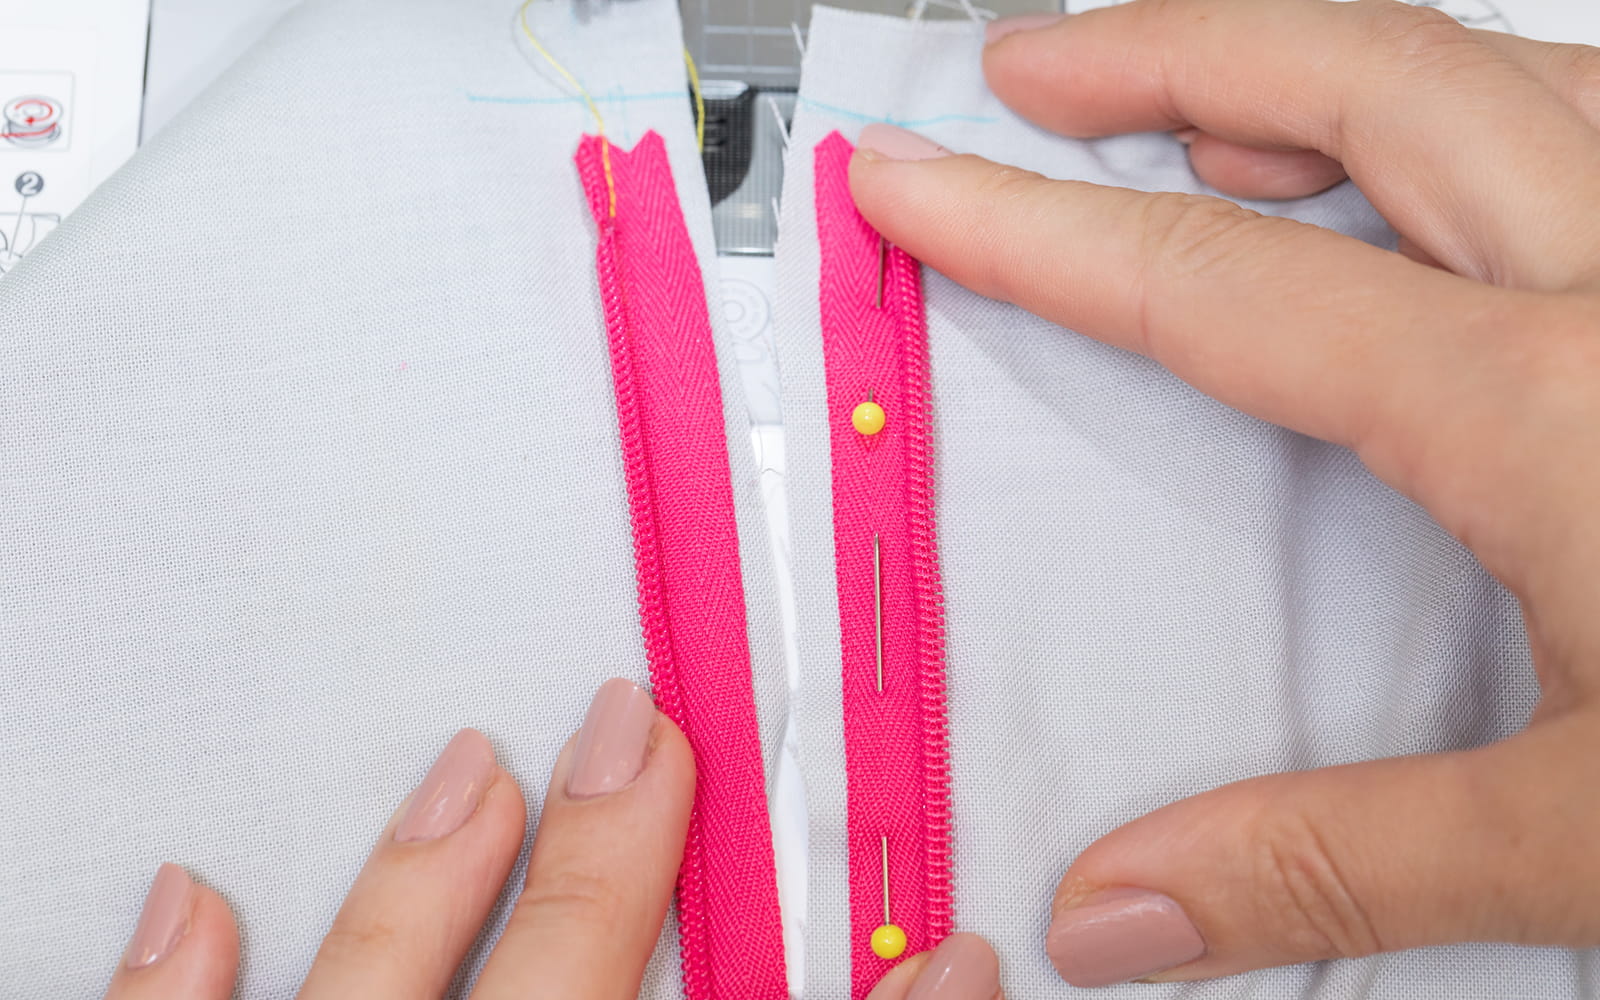 Hands pinning pink concealed zip in place